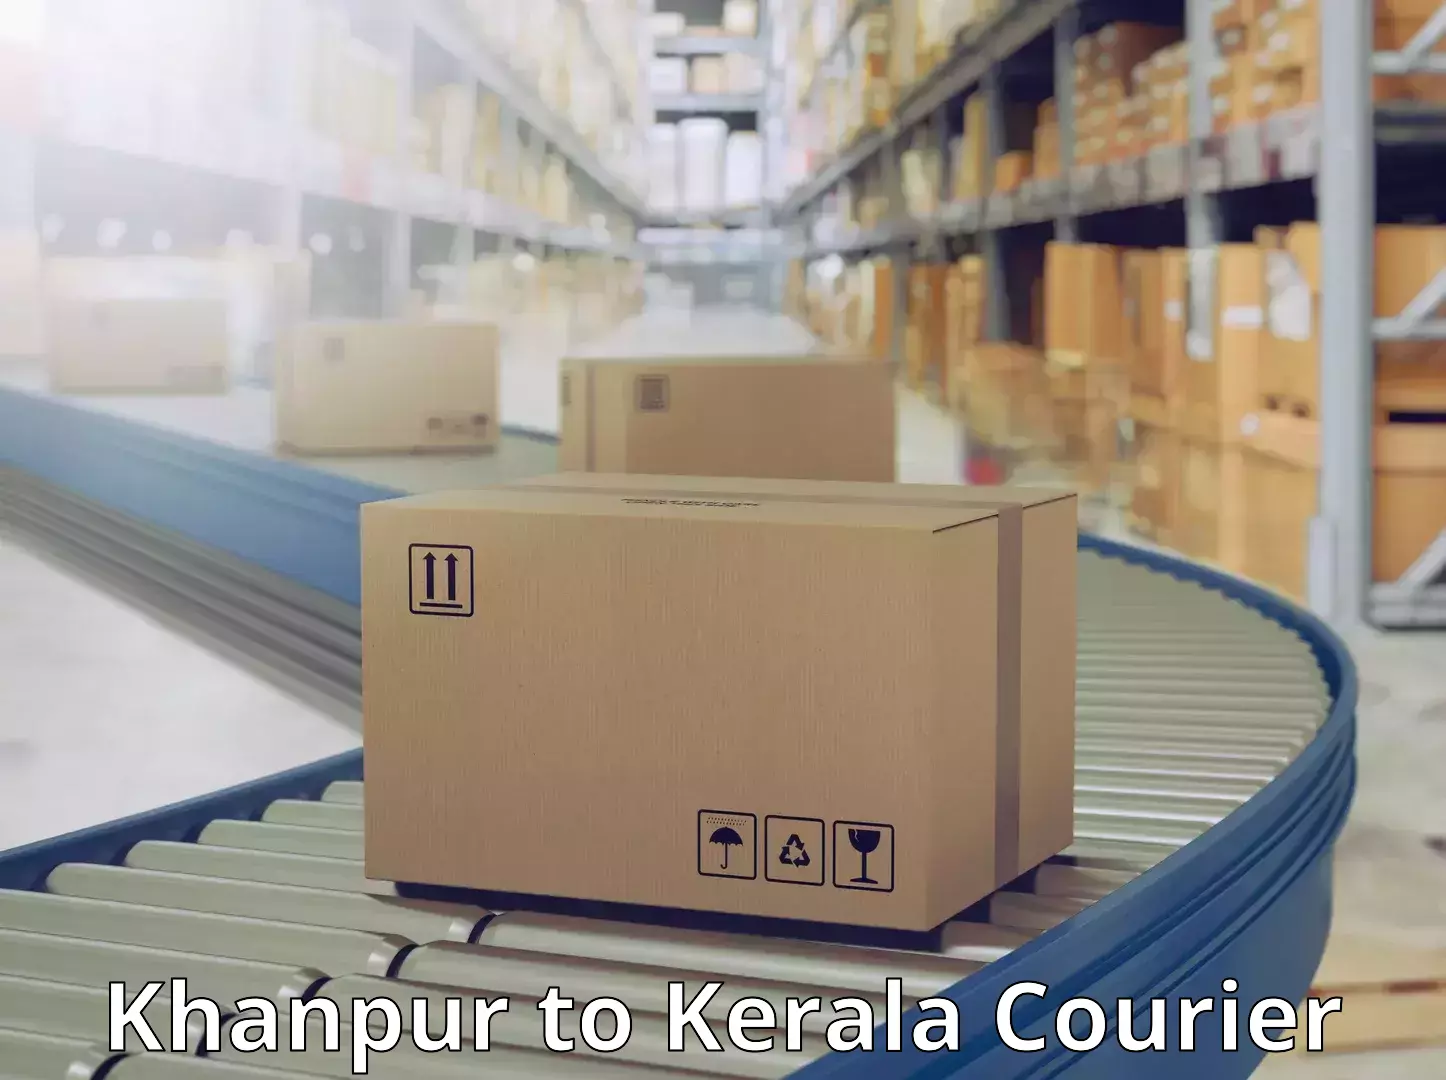 Flexible delivery schedules Khanpur to Kerala